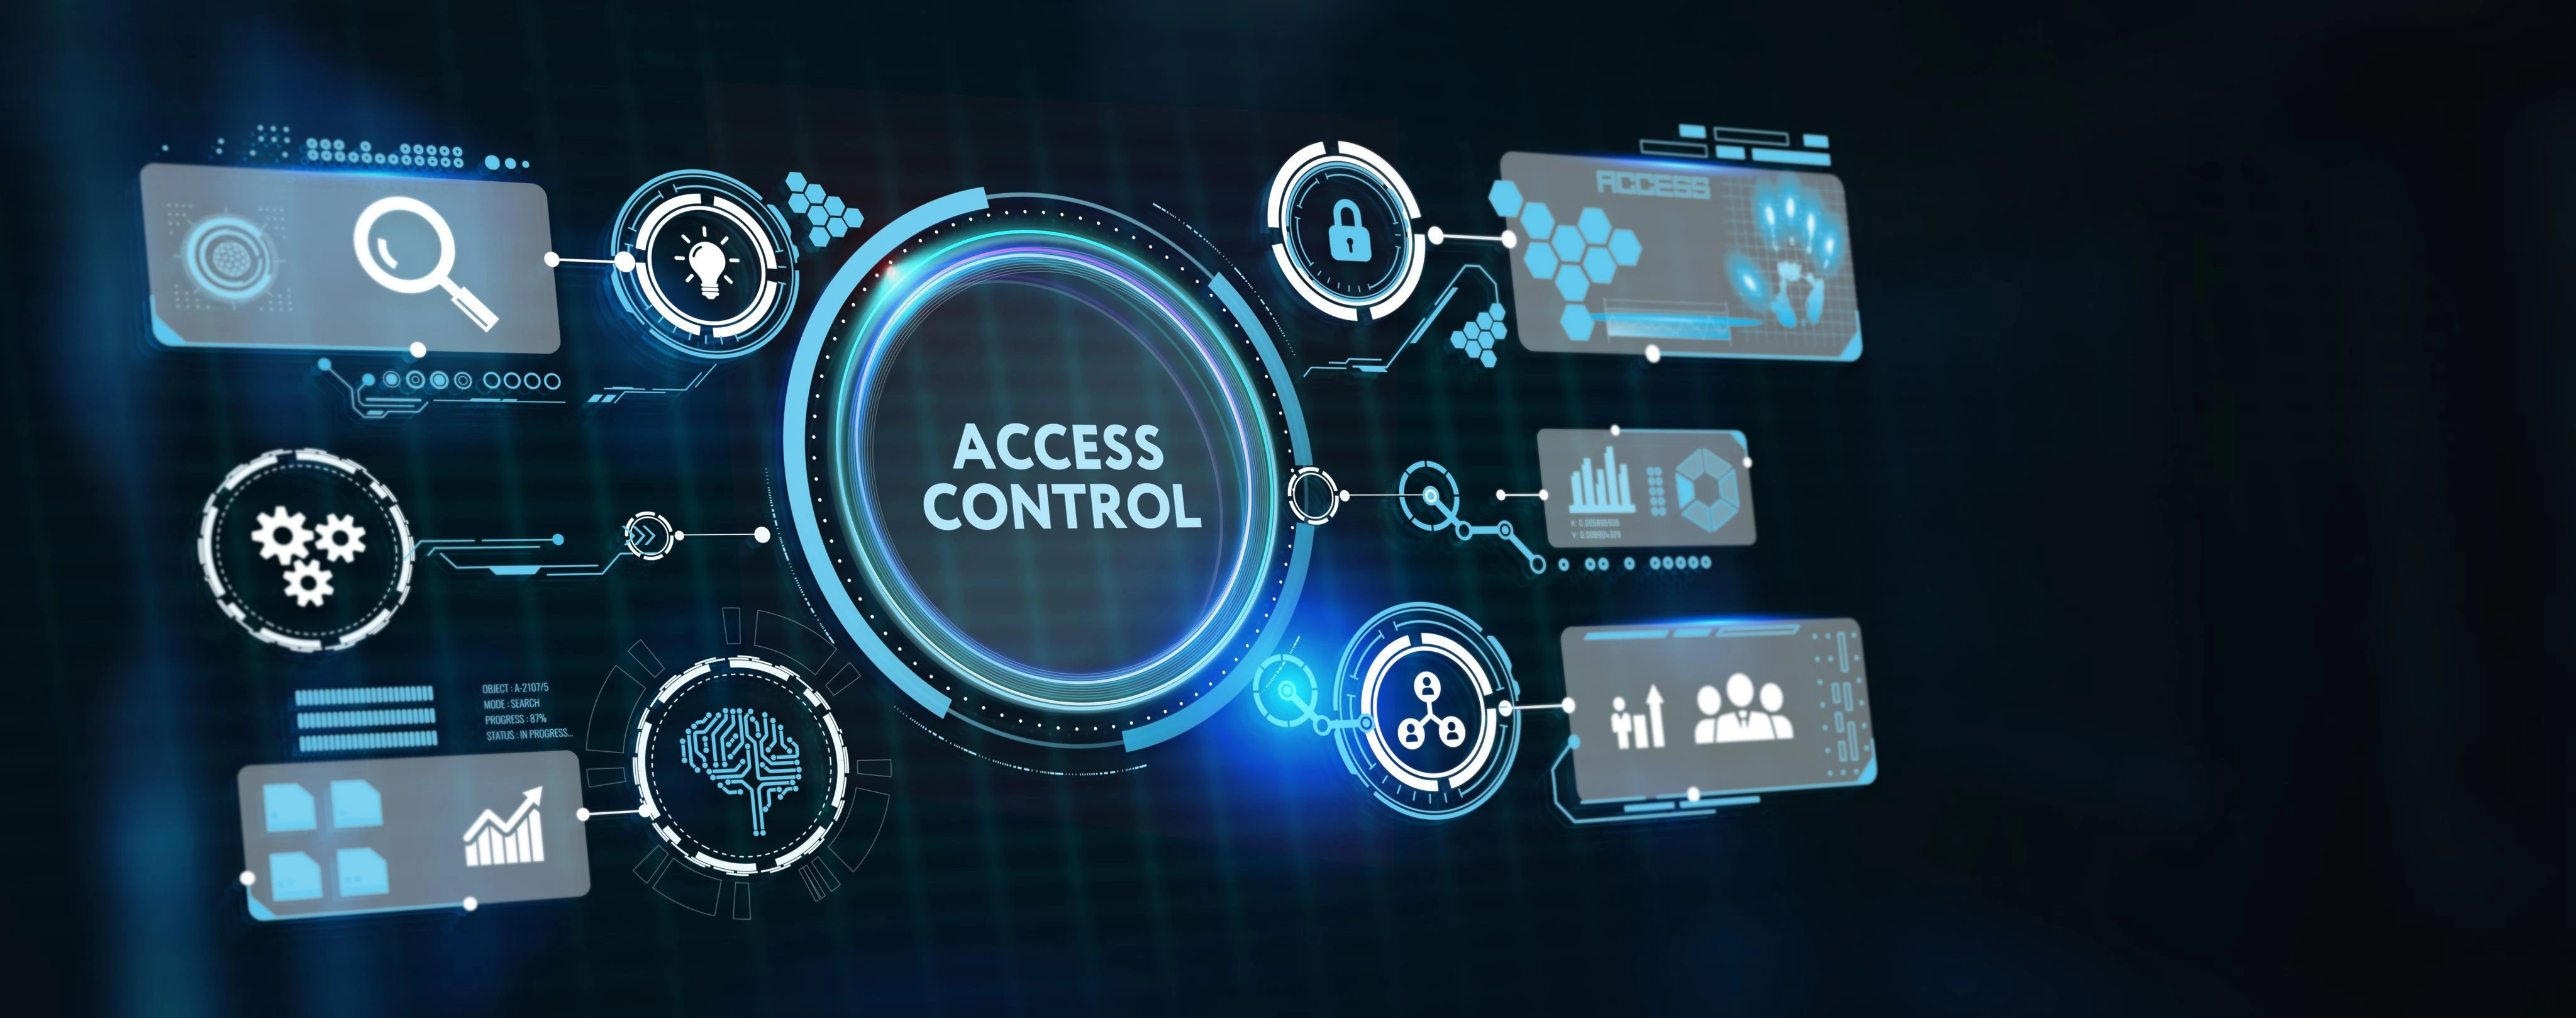 Access control provides a way for companies to ensure safety and security!